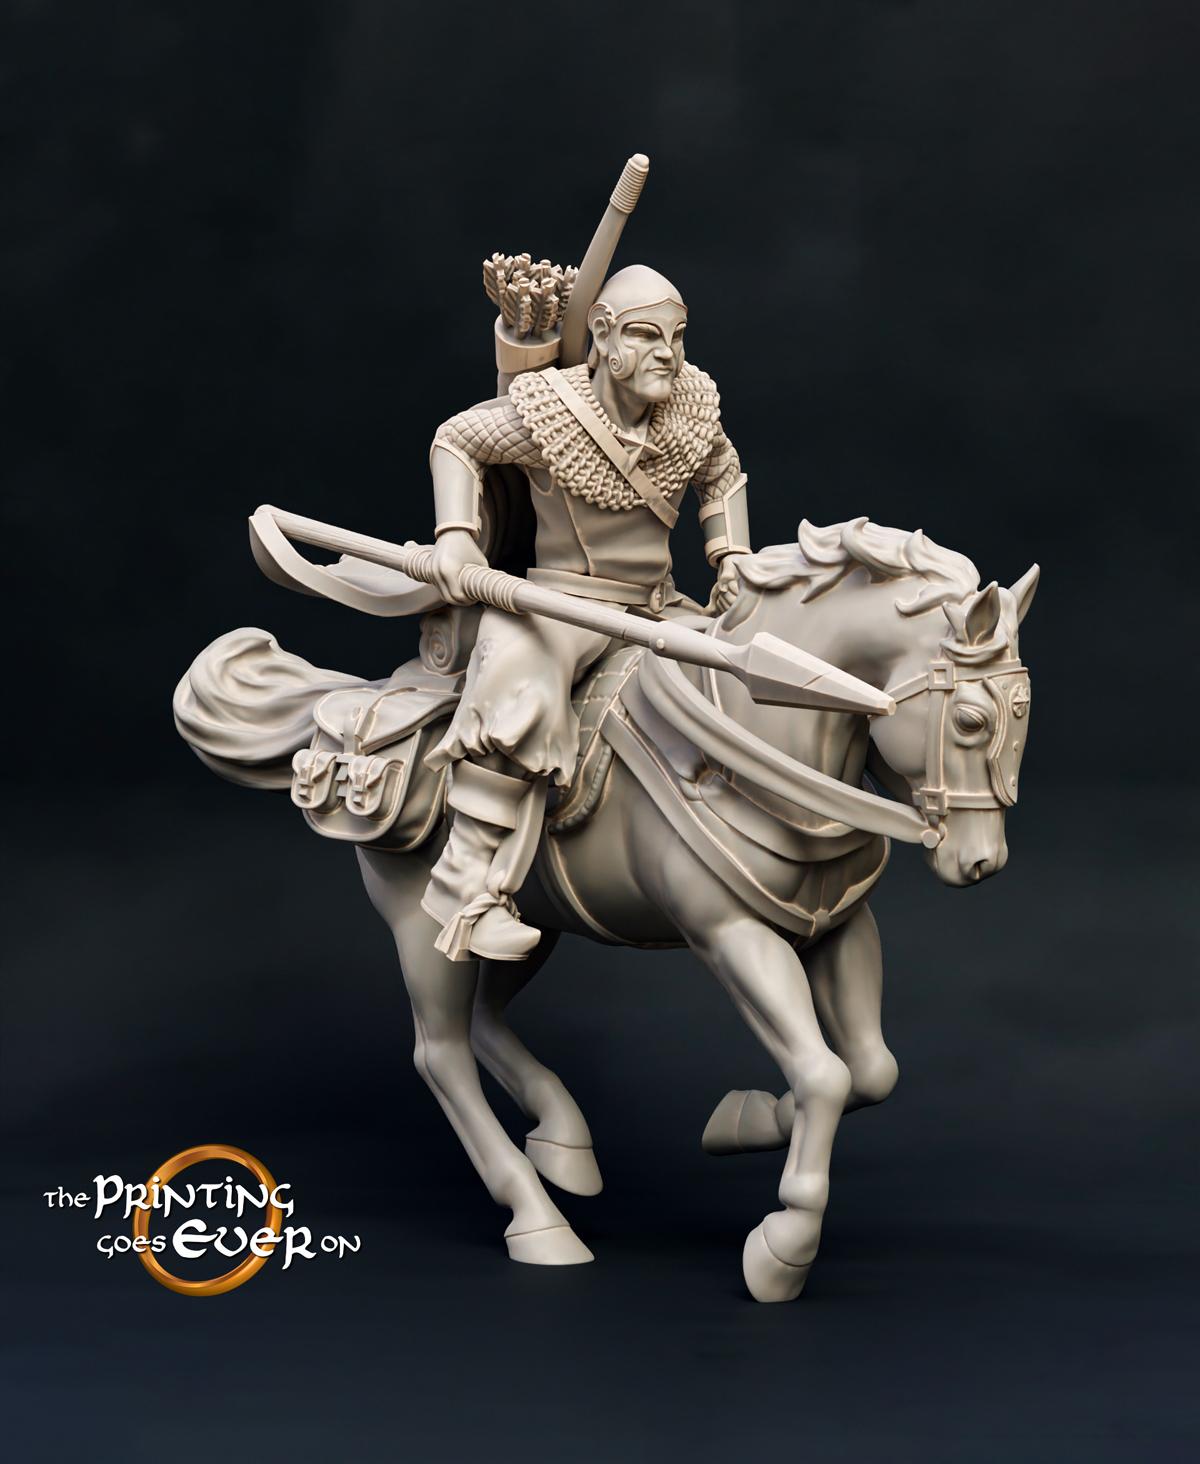 Rangers with Spears - On Foot and Mounted 3d model